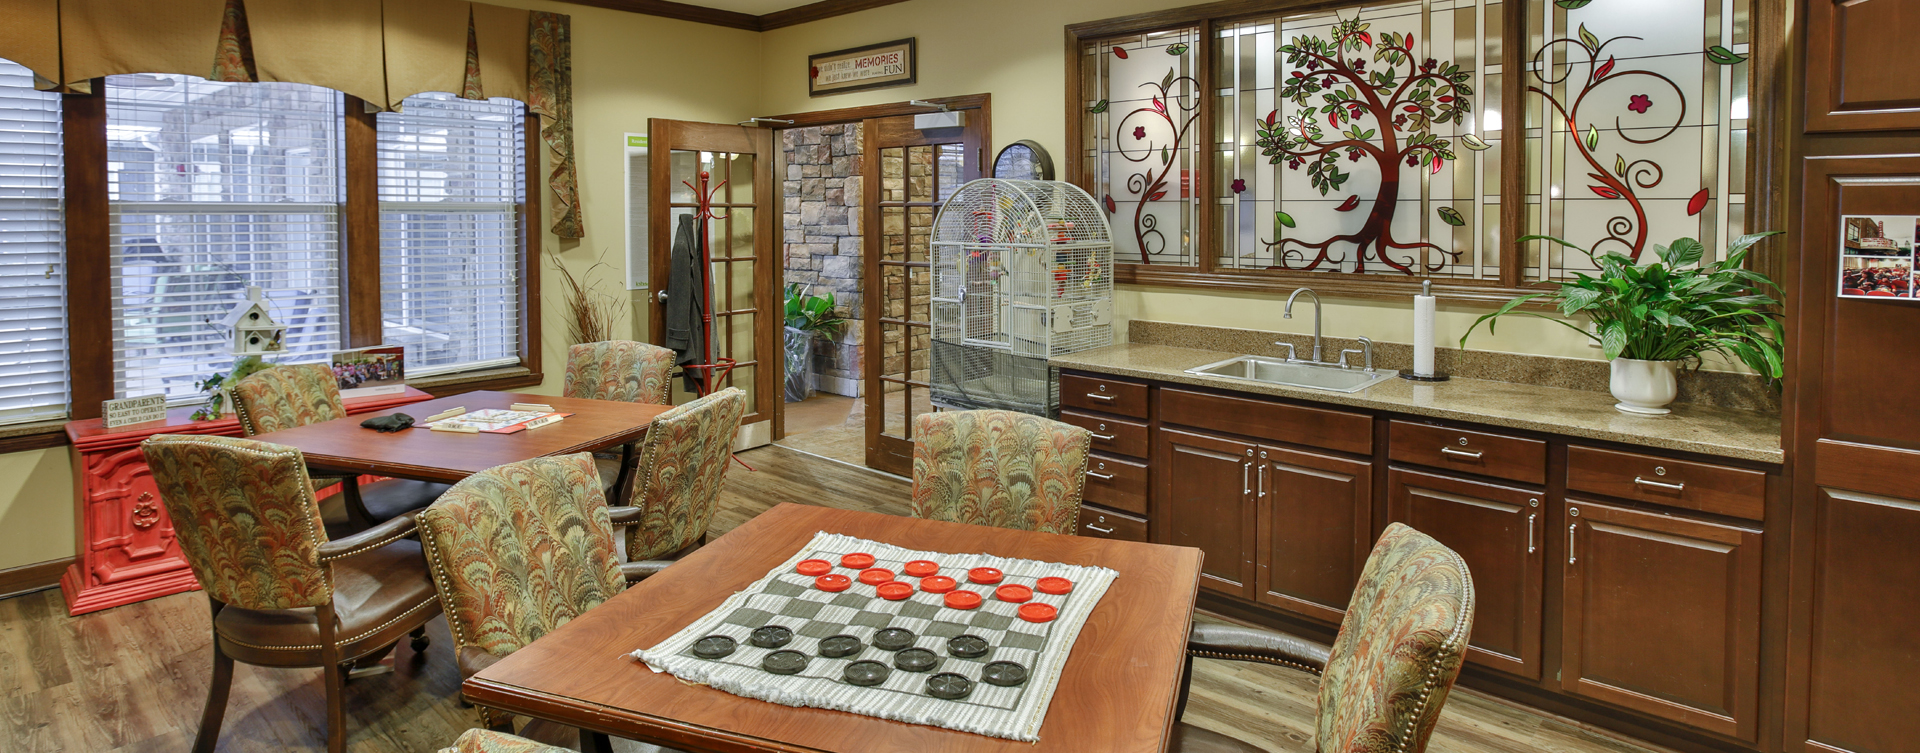 Unleash your creative side in the activity room at Bickford of Crown Point